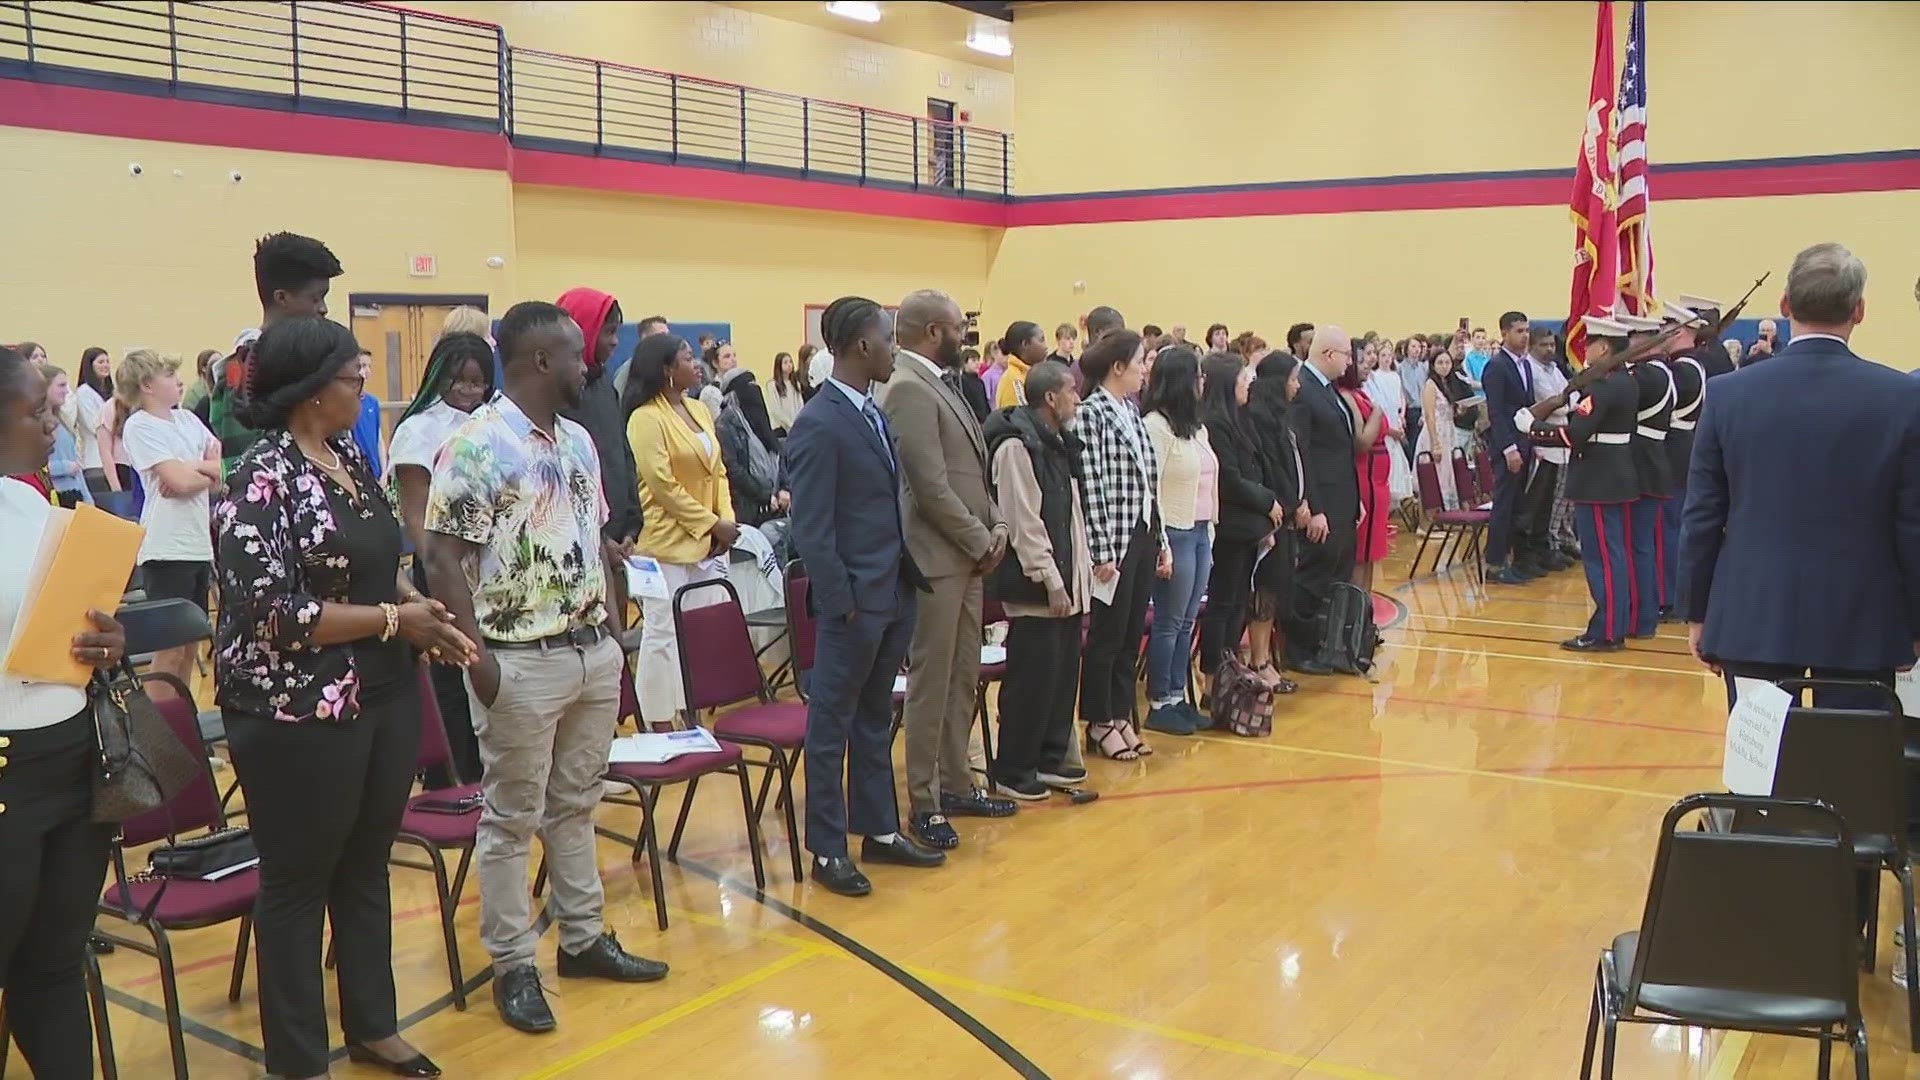 Naturalization ceremony held today at YMCA